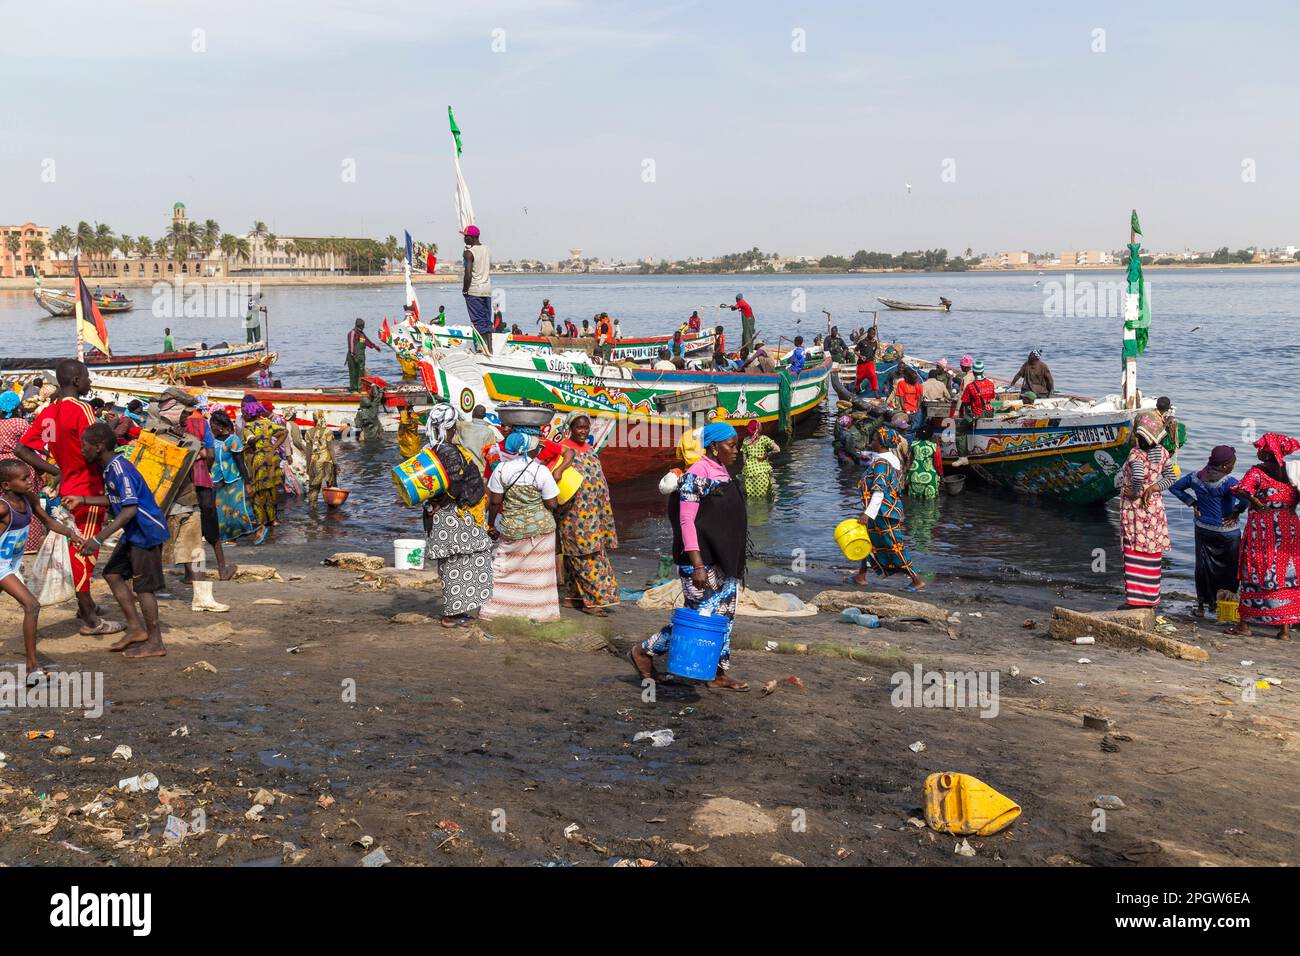 MBour, Senegal: August 18, 2019: Unidentified Senegalese men and women at the fish market in the port city near Dakar. Stock Photo